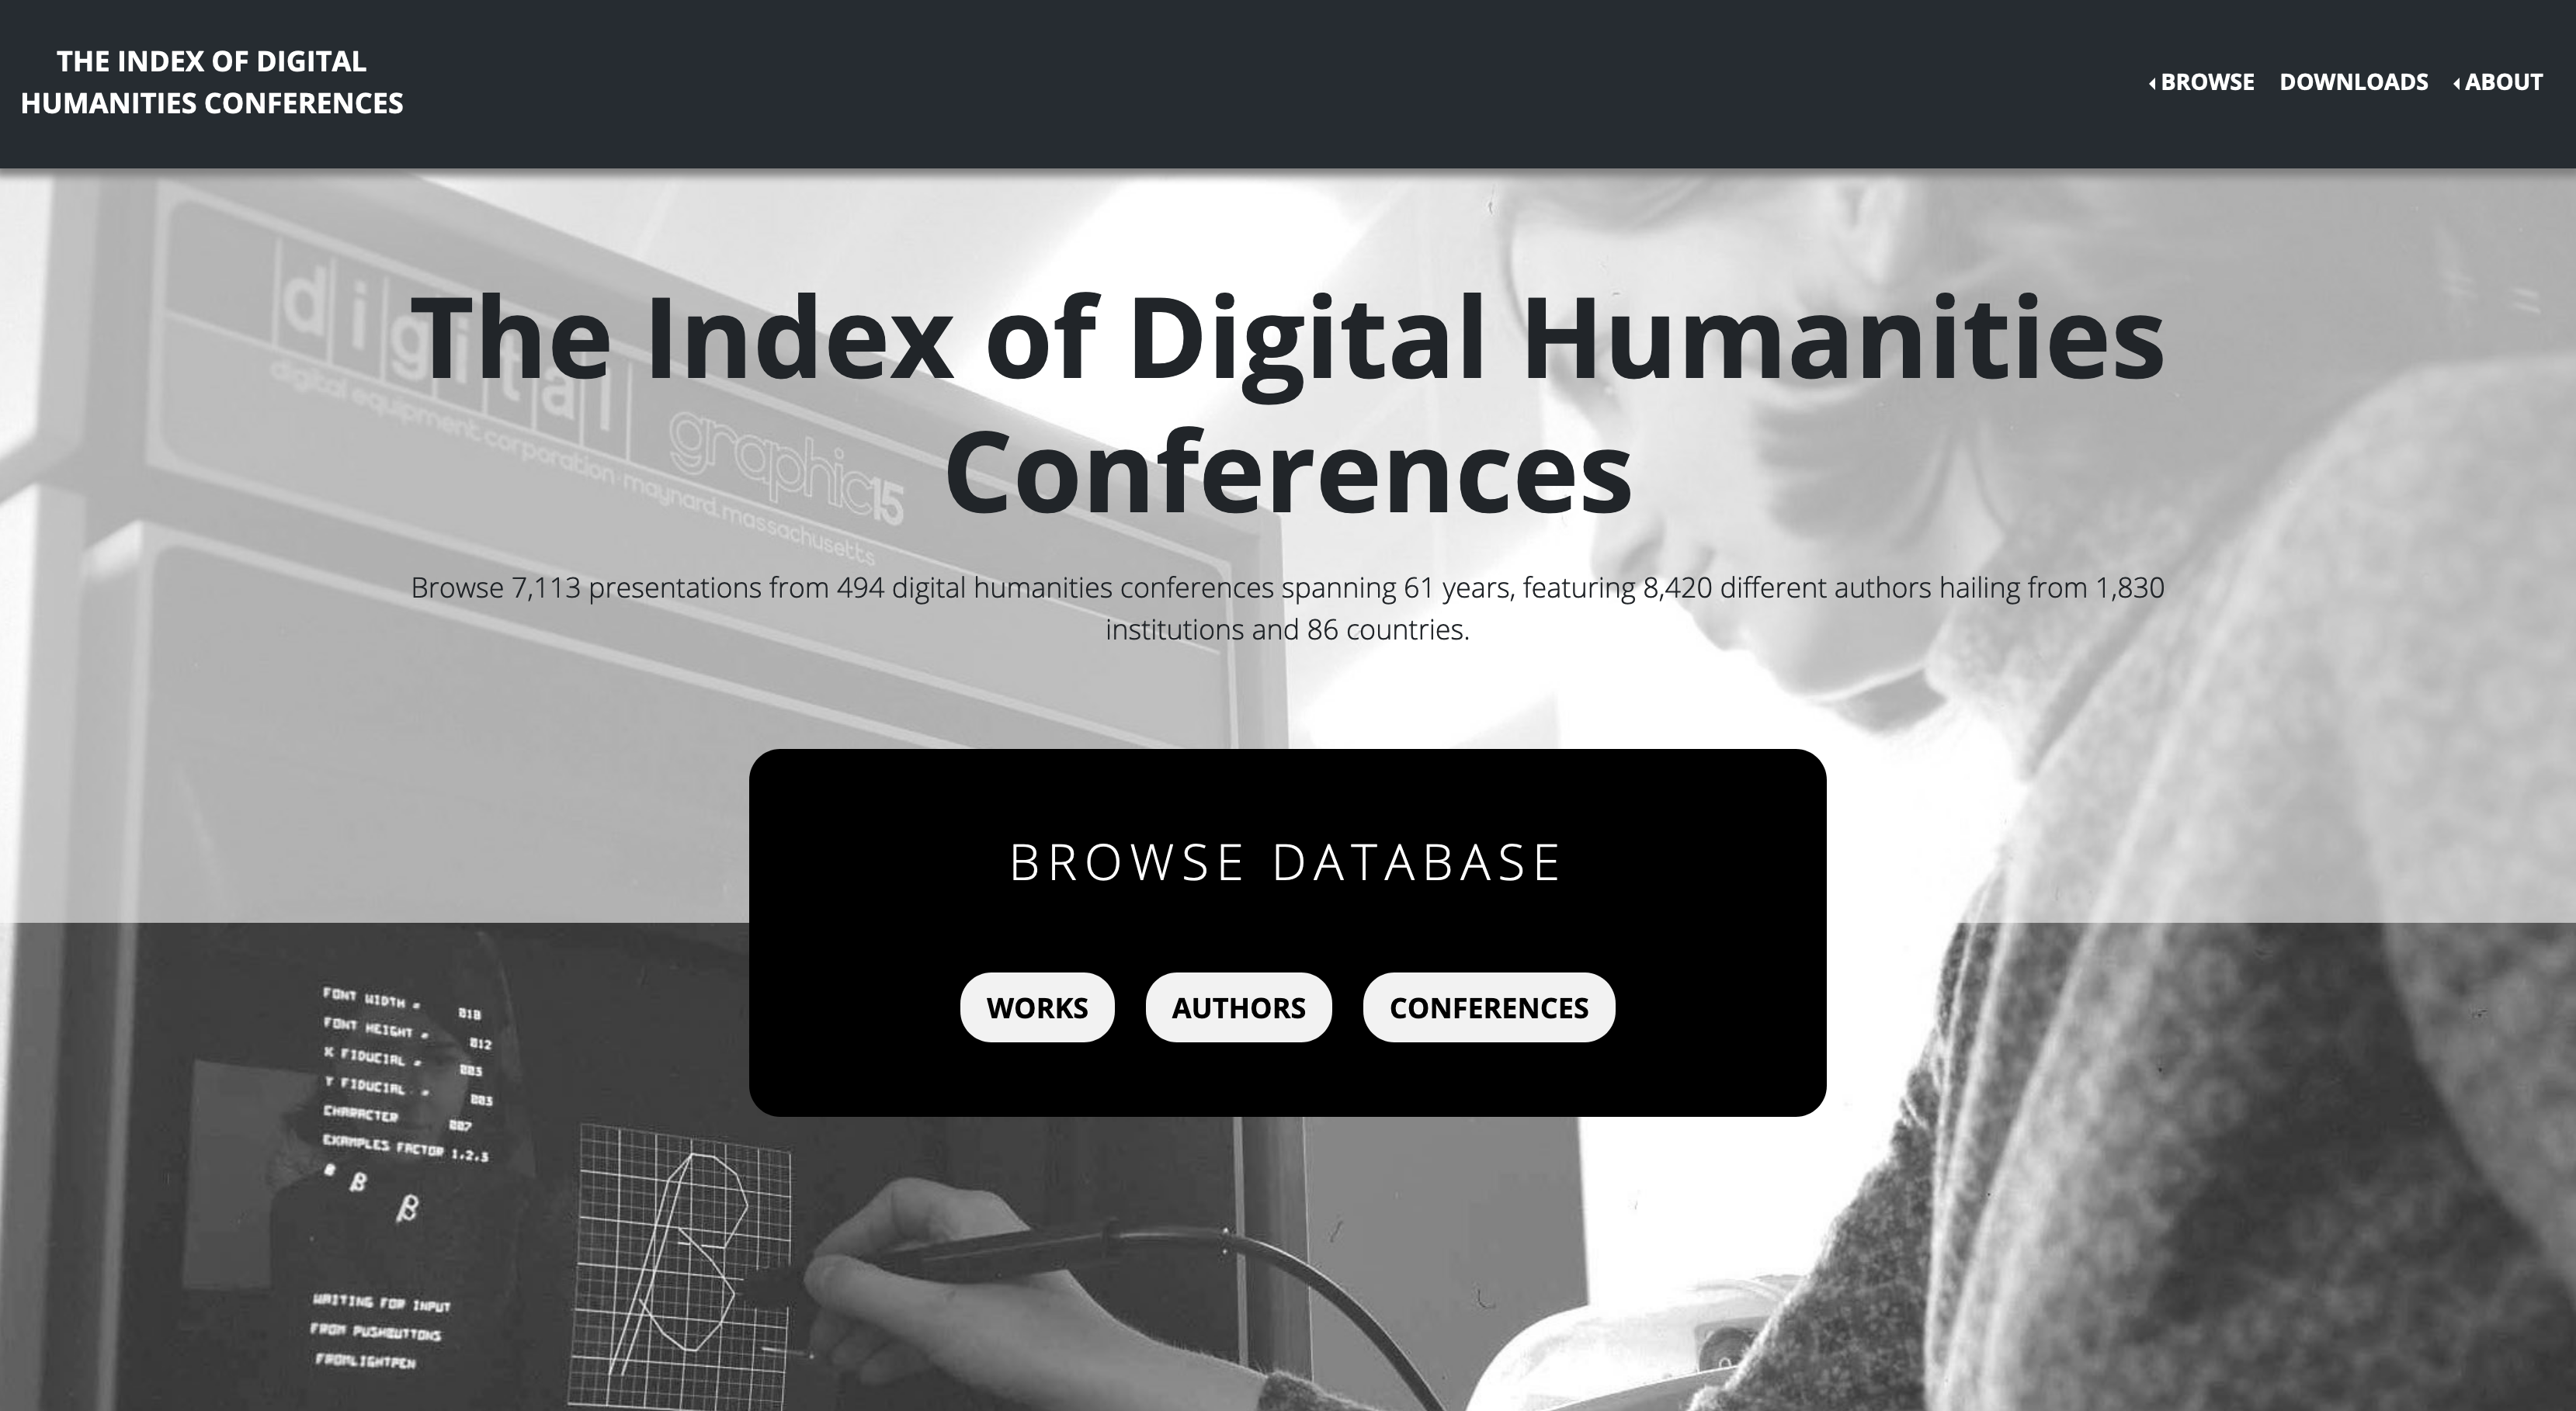 The homepage of The Index of Digital Humanities Conferences